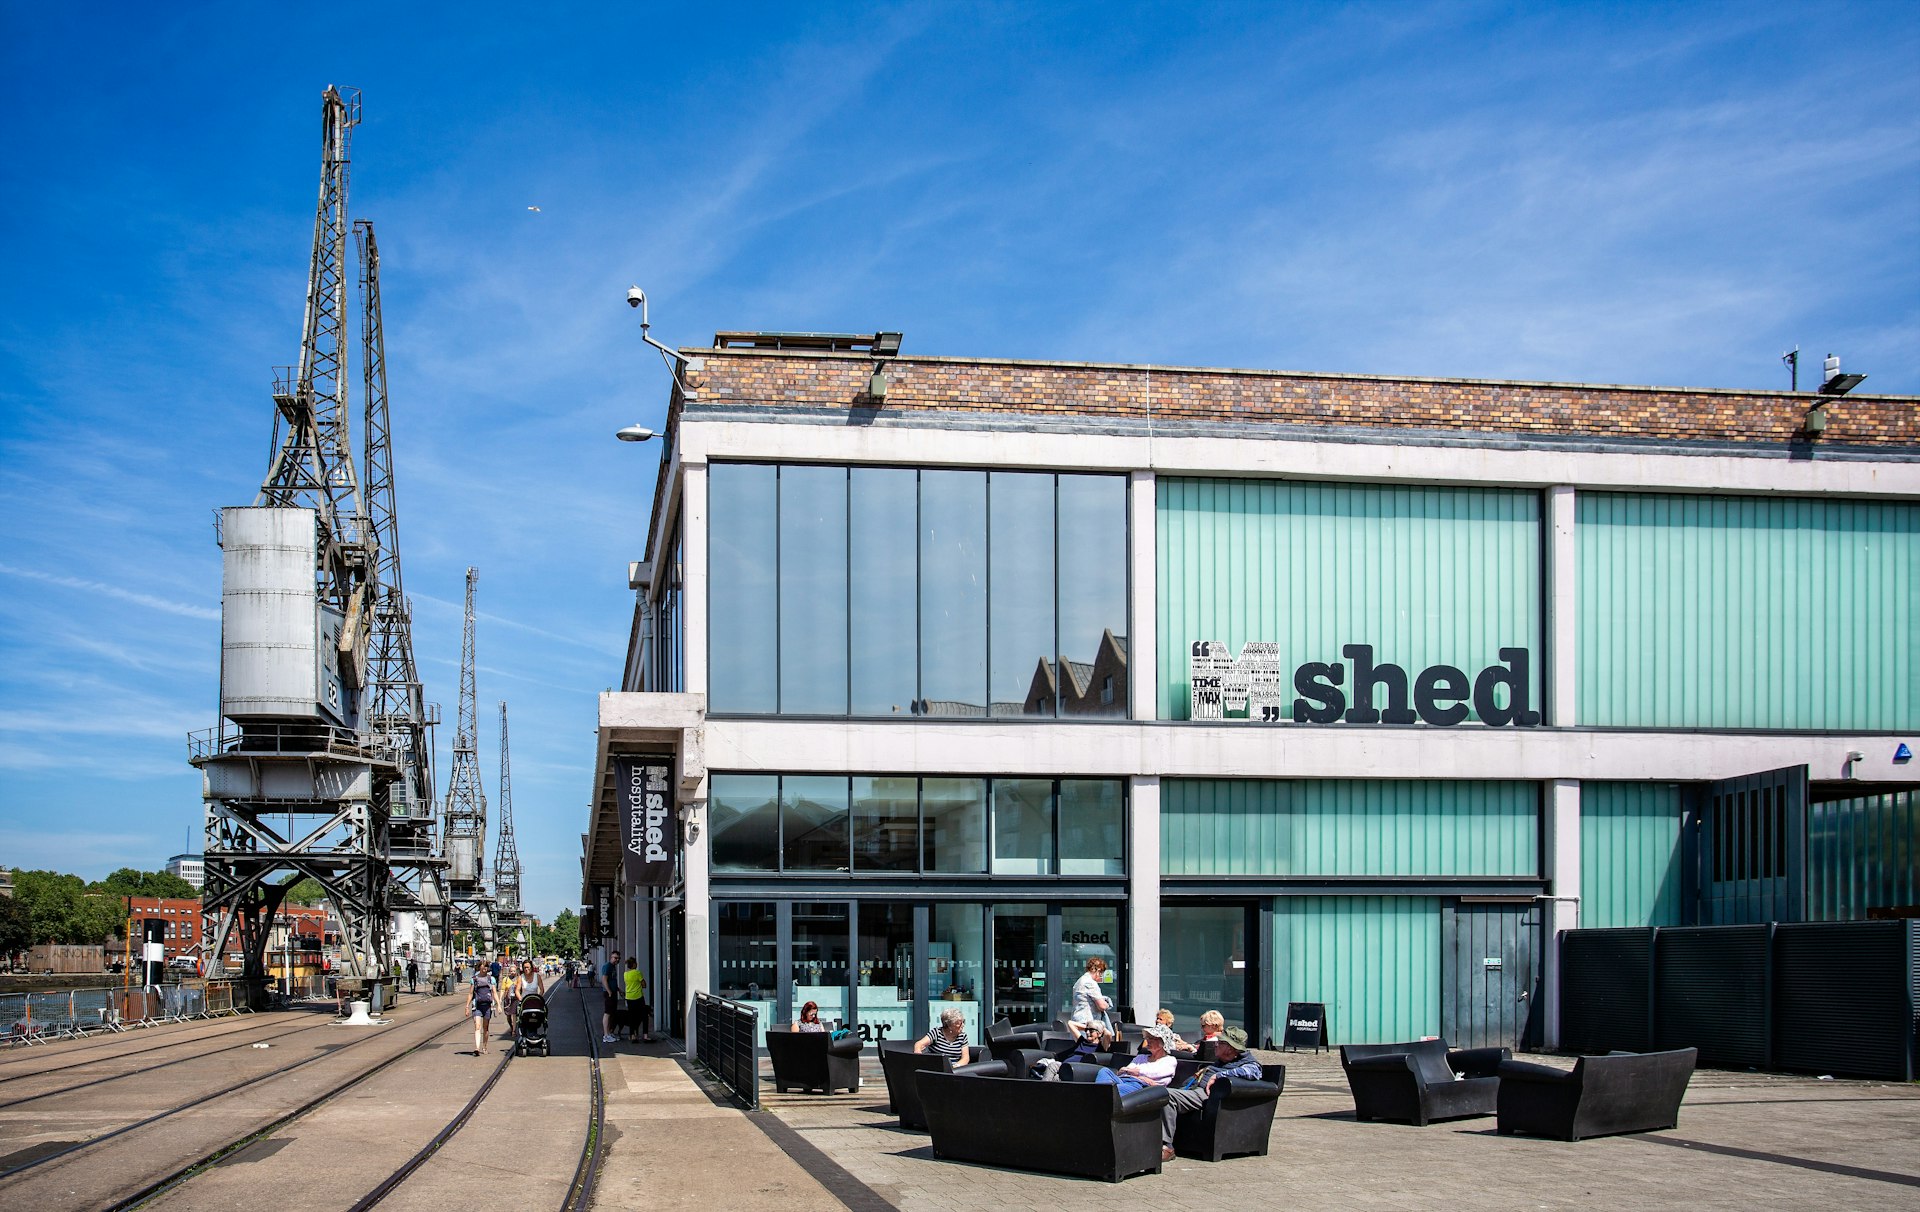 People sitting in front of the M Shed museum by gantry cranes in the former wharves of Bristol, Southwest, England, UK